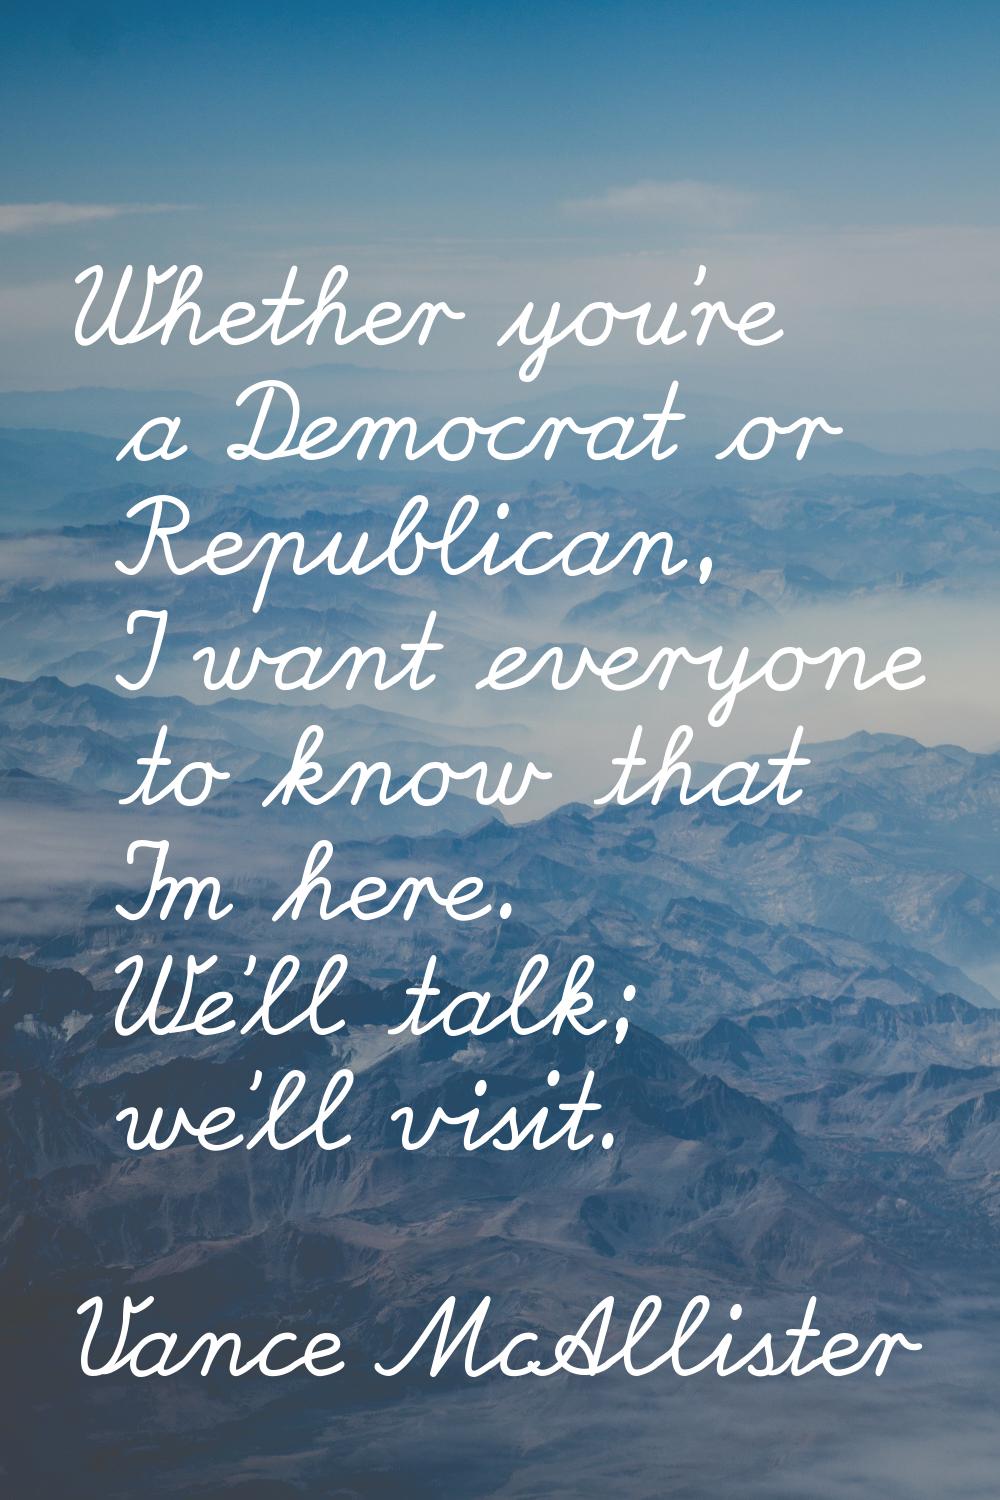 Whether you're a Democrat or Republican, I want everyone to know that I'm here. We'll talk; we'll v